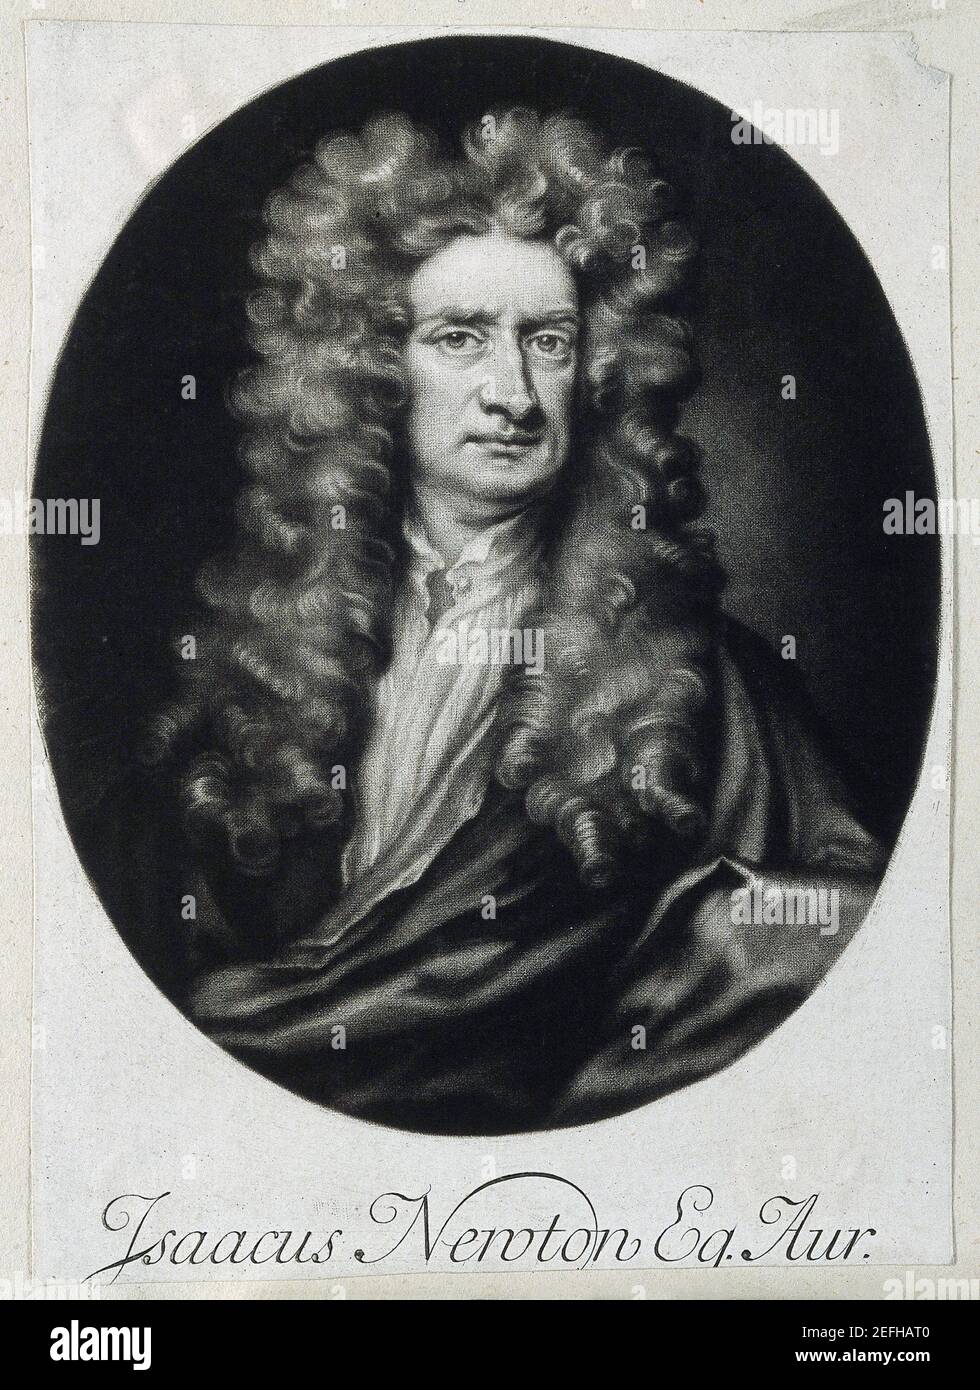 Sir Isaac Newton, English mathematician, physicist, astronomer, theologian, and author who is widely recognized as one of the most influential scientists of all time and as a key figure in the scientific revolution. Mezzotint after J. Smith, 1712, after Sir G. Kneller, 1702 / Wellcome Collection / File Reference # 1003-857THA Stock Photo